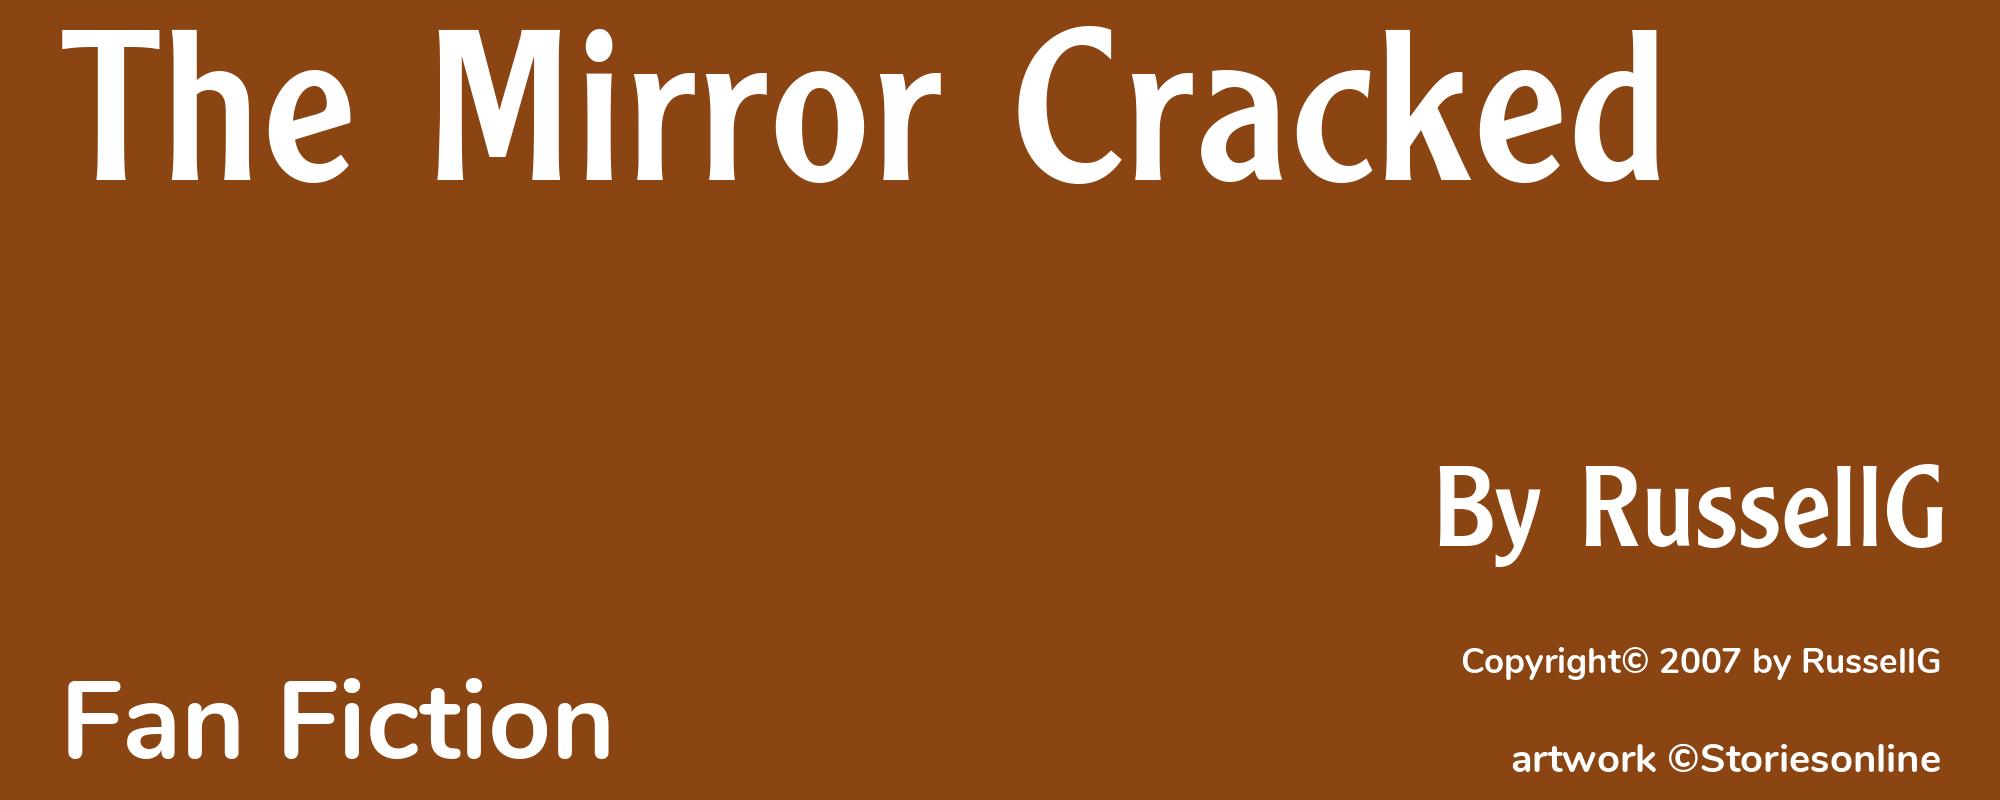 The Mirror Cracked - Cover